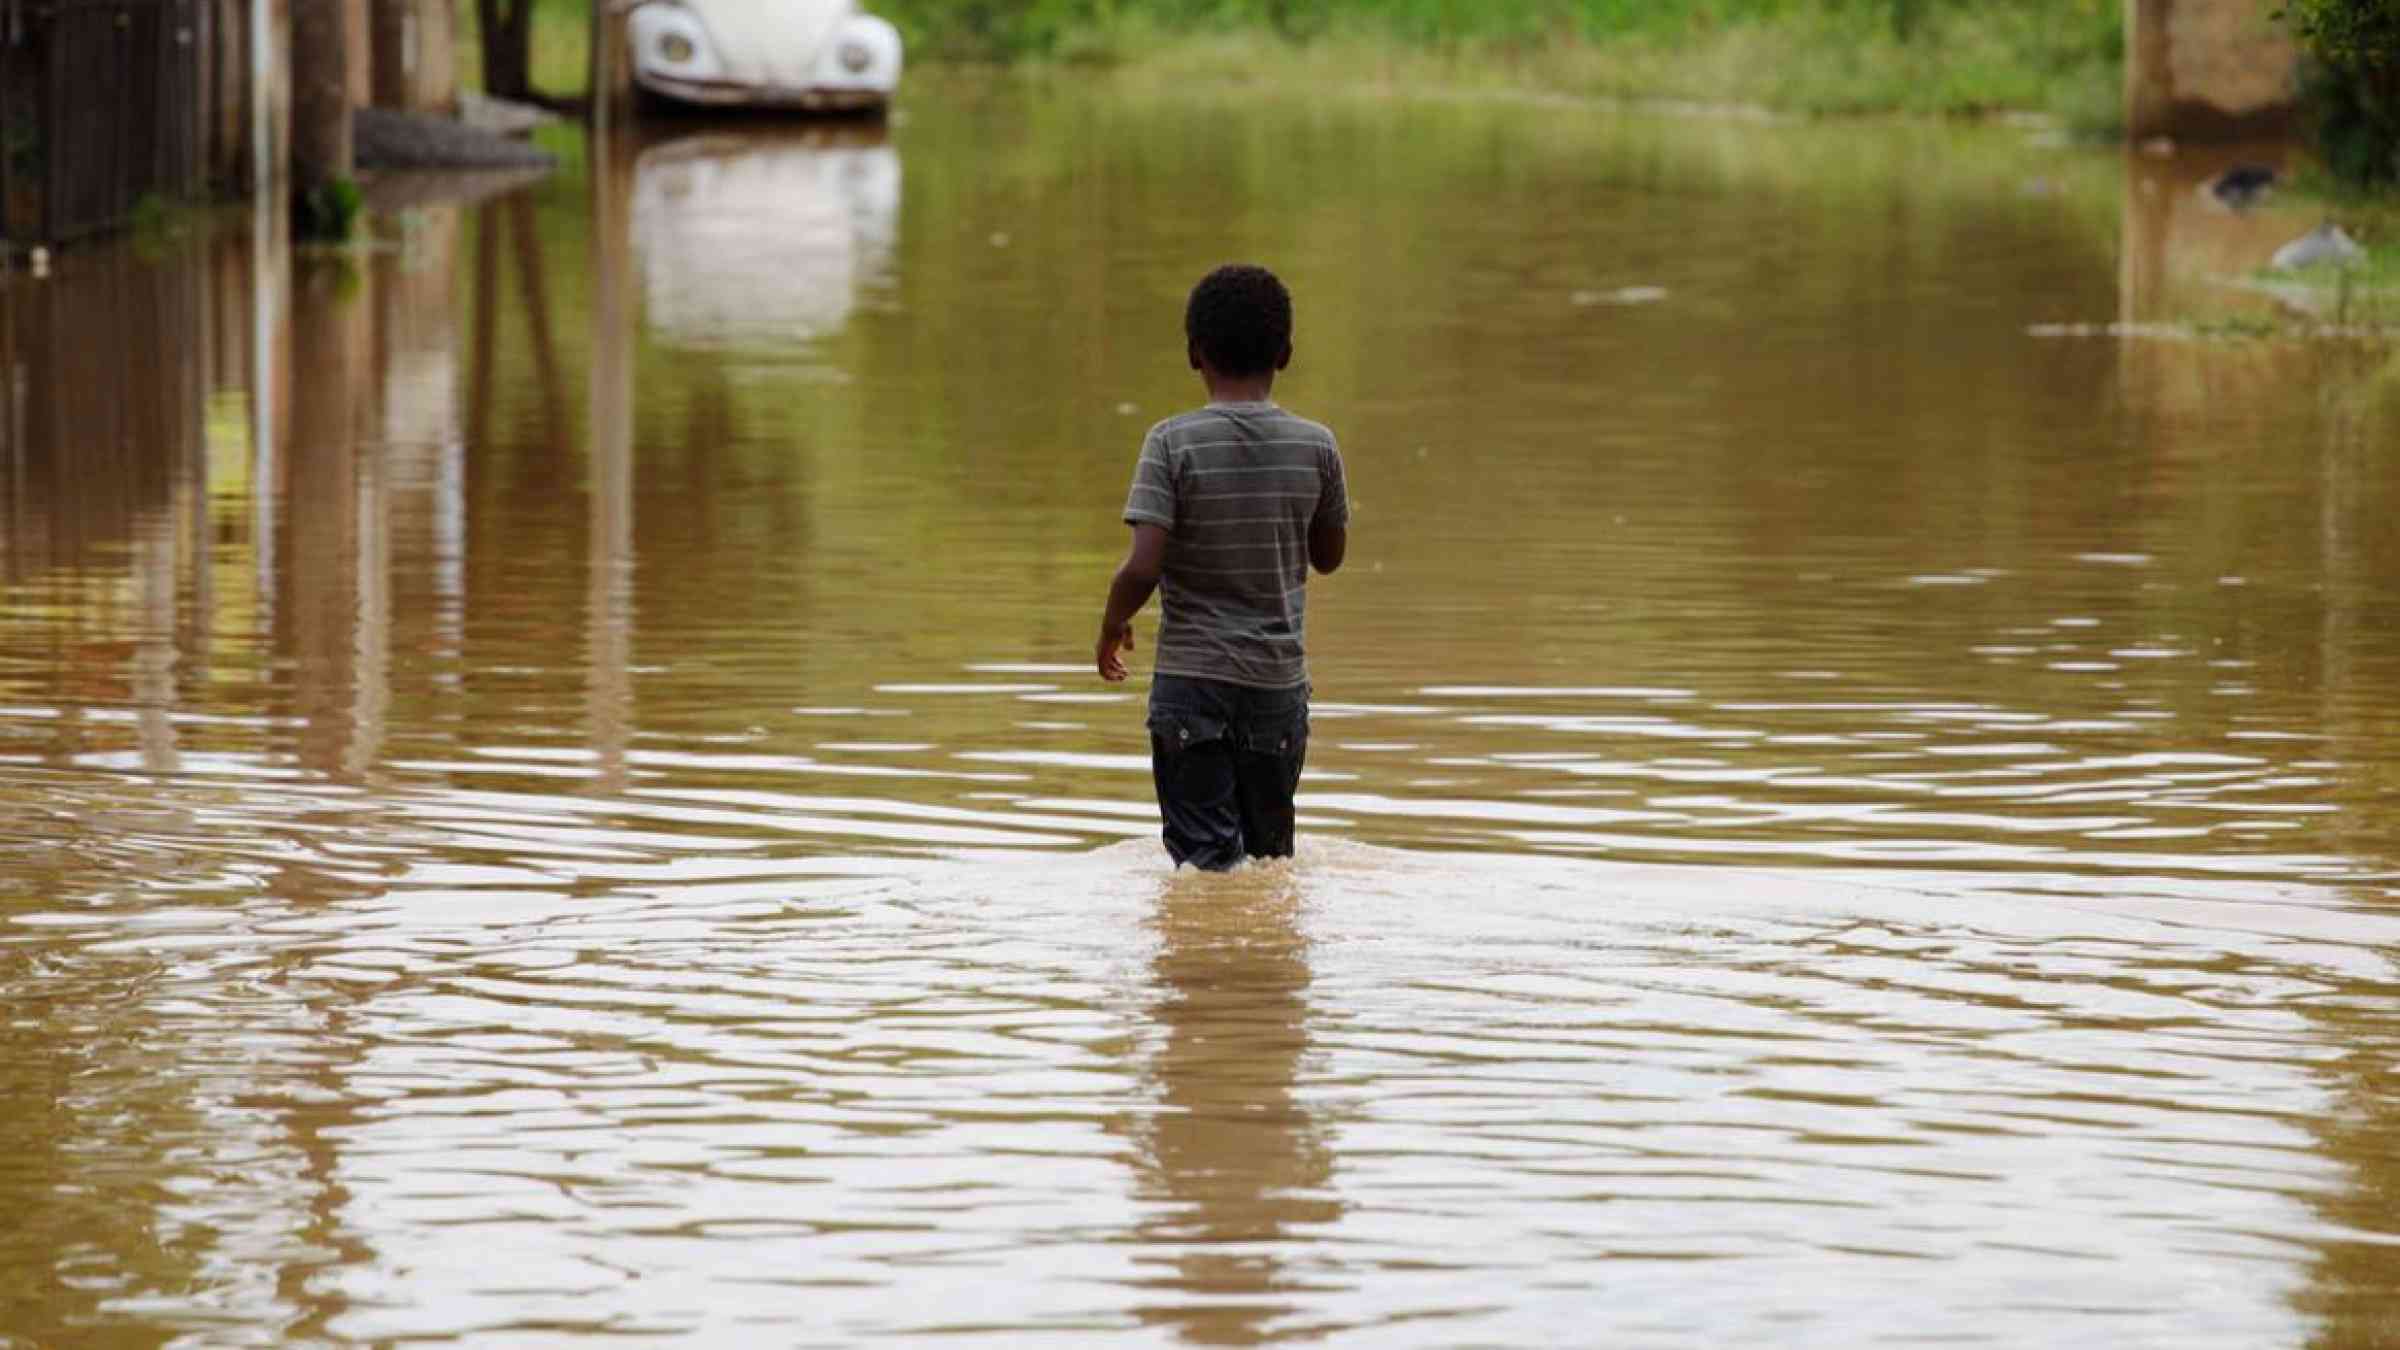 A young boy looks on as he walks through a flooded street after heavy rains hit a residential neighborhood in Capivari, Brazil (2015). Nelson Antoine/Shutterstock